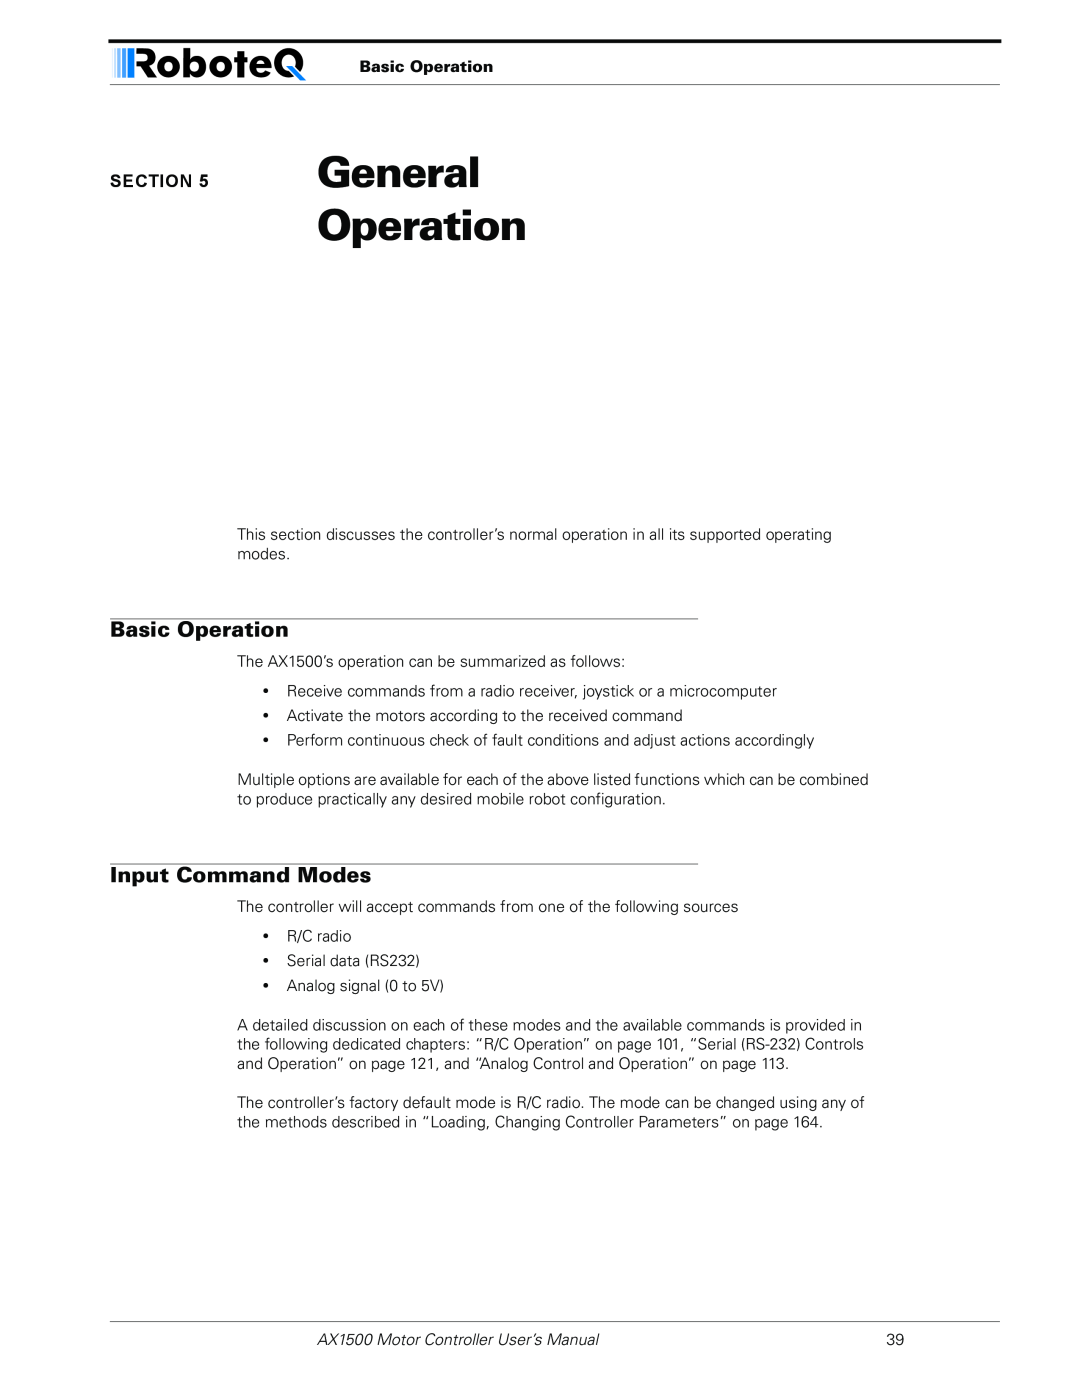 RoboteQ AX2550 General Operation, Basic Operation, Input Command Modes, AX1500 Motor Controller User’s Manual 